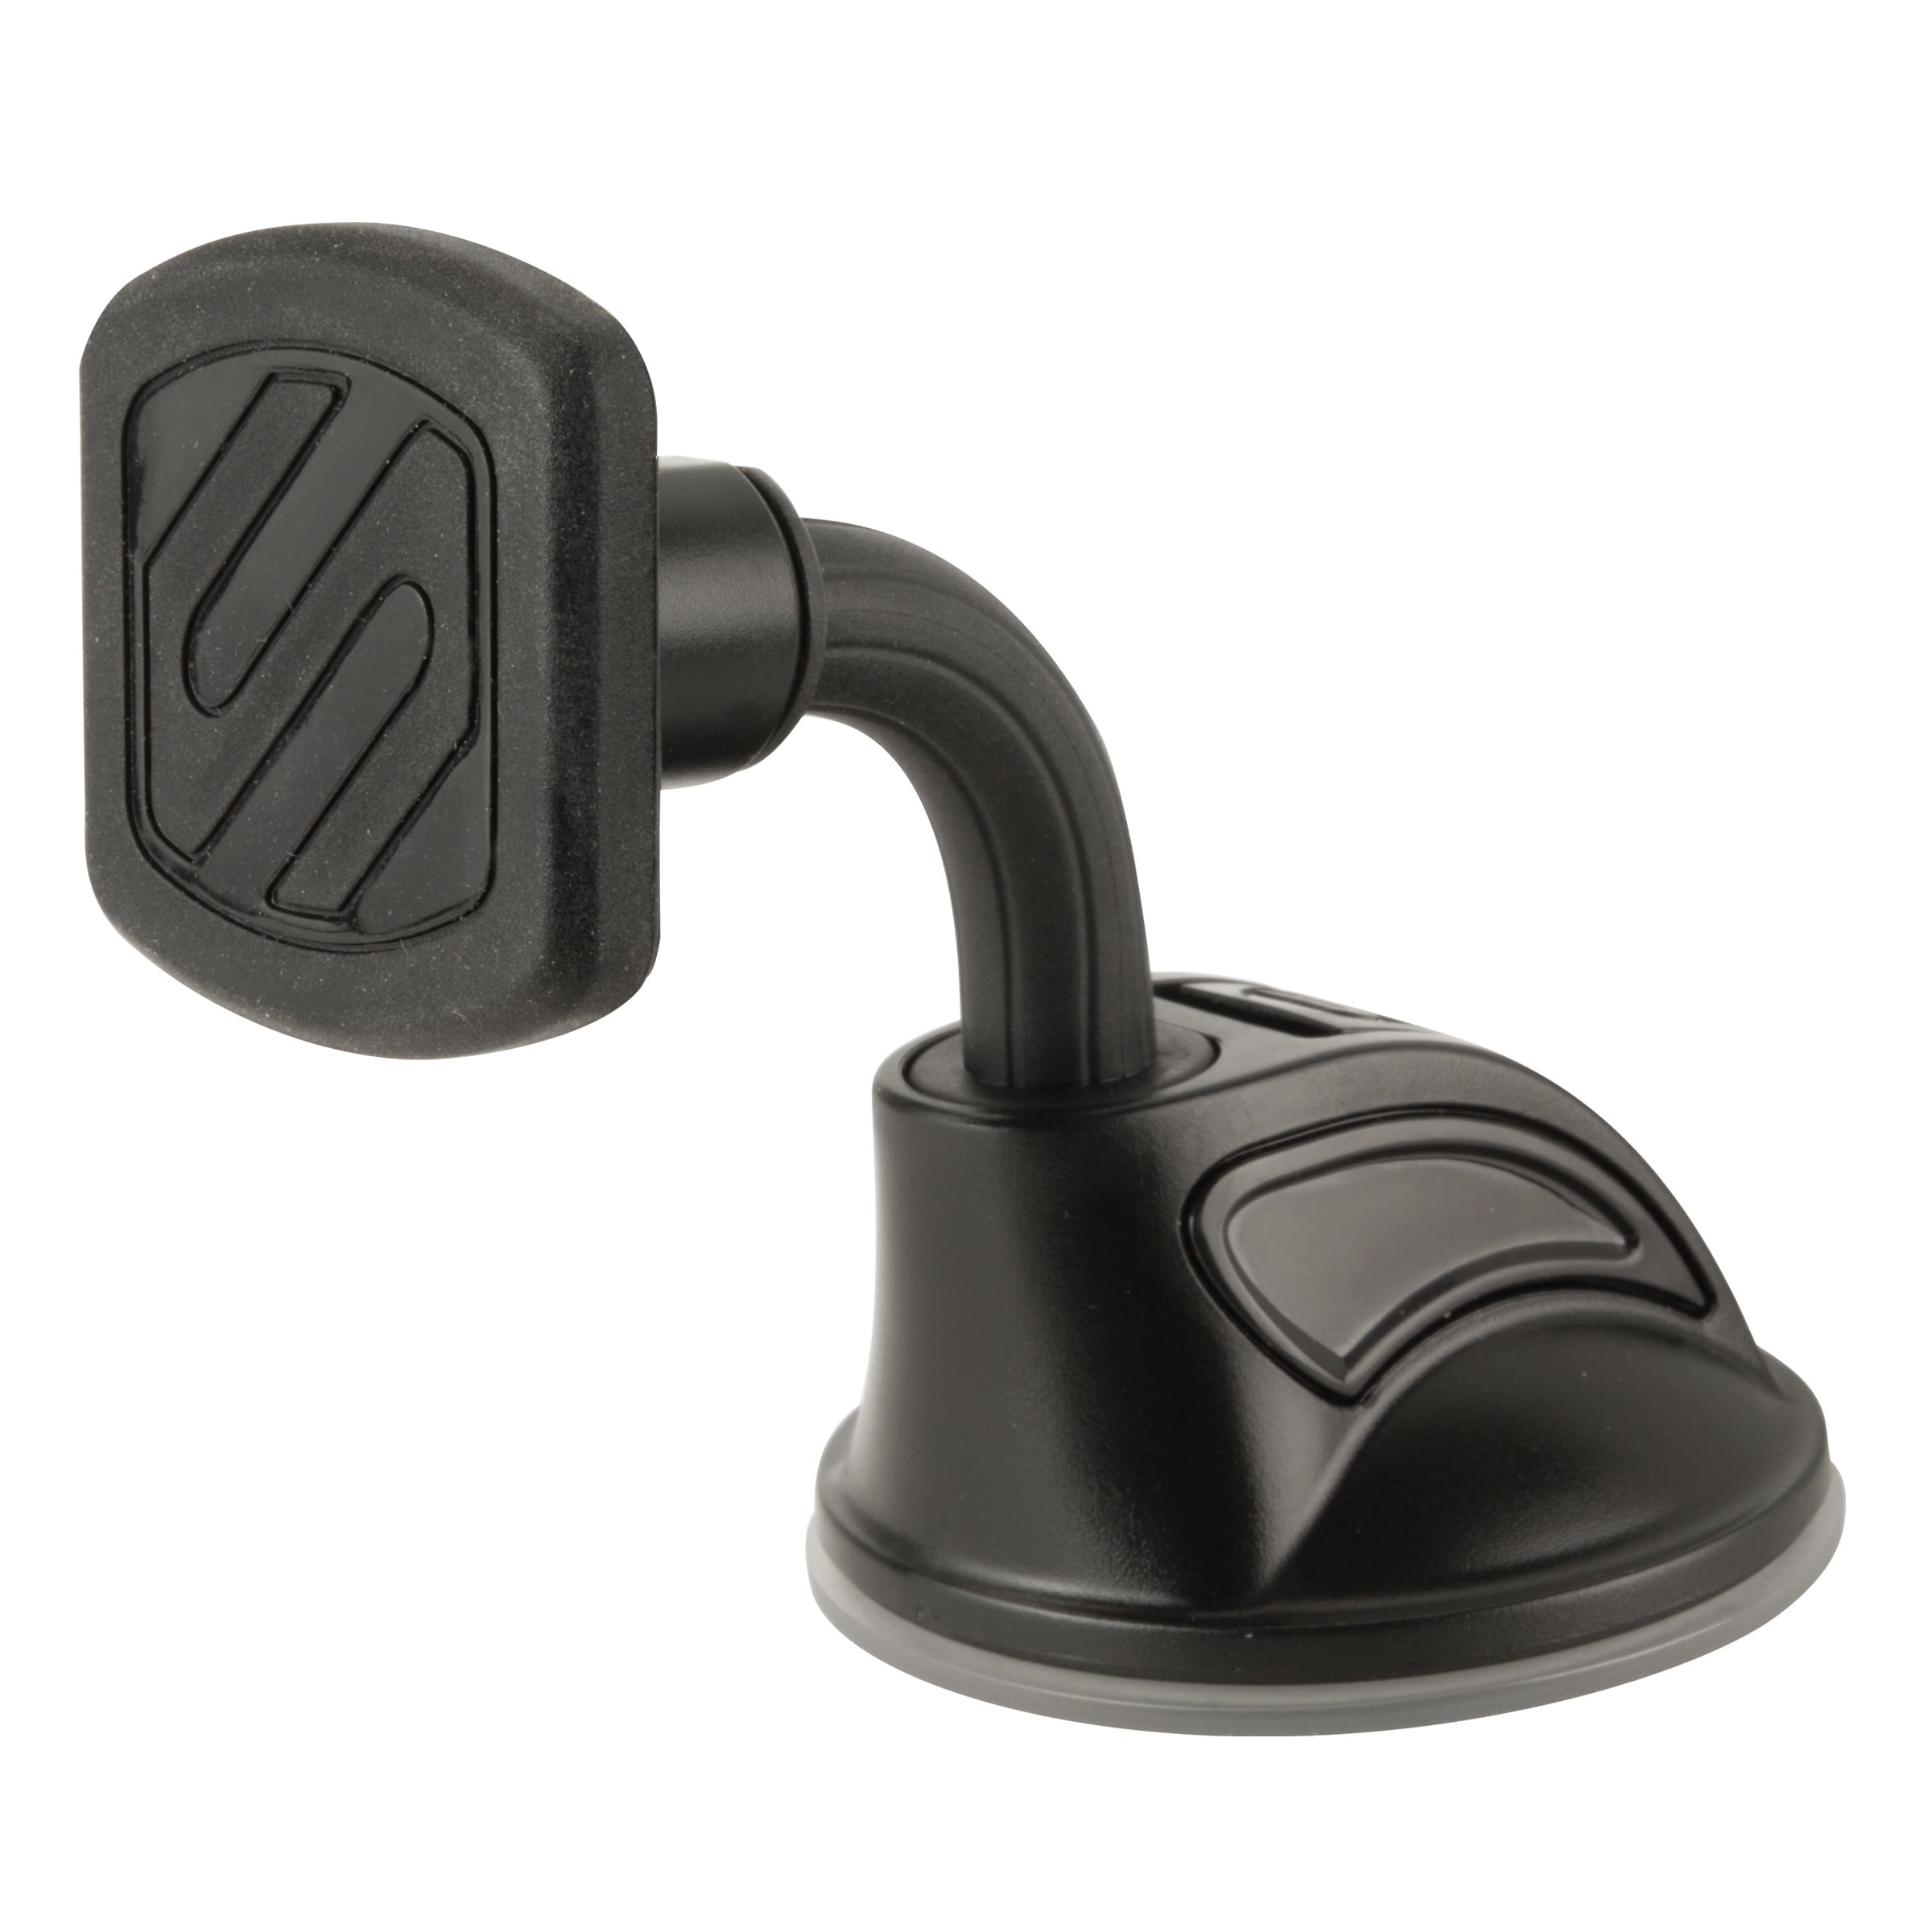 Scosche MAGHDGPS Magic Mount Universal Magnetic Phone/GPS Suction Cup Mount